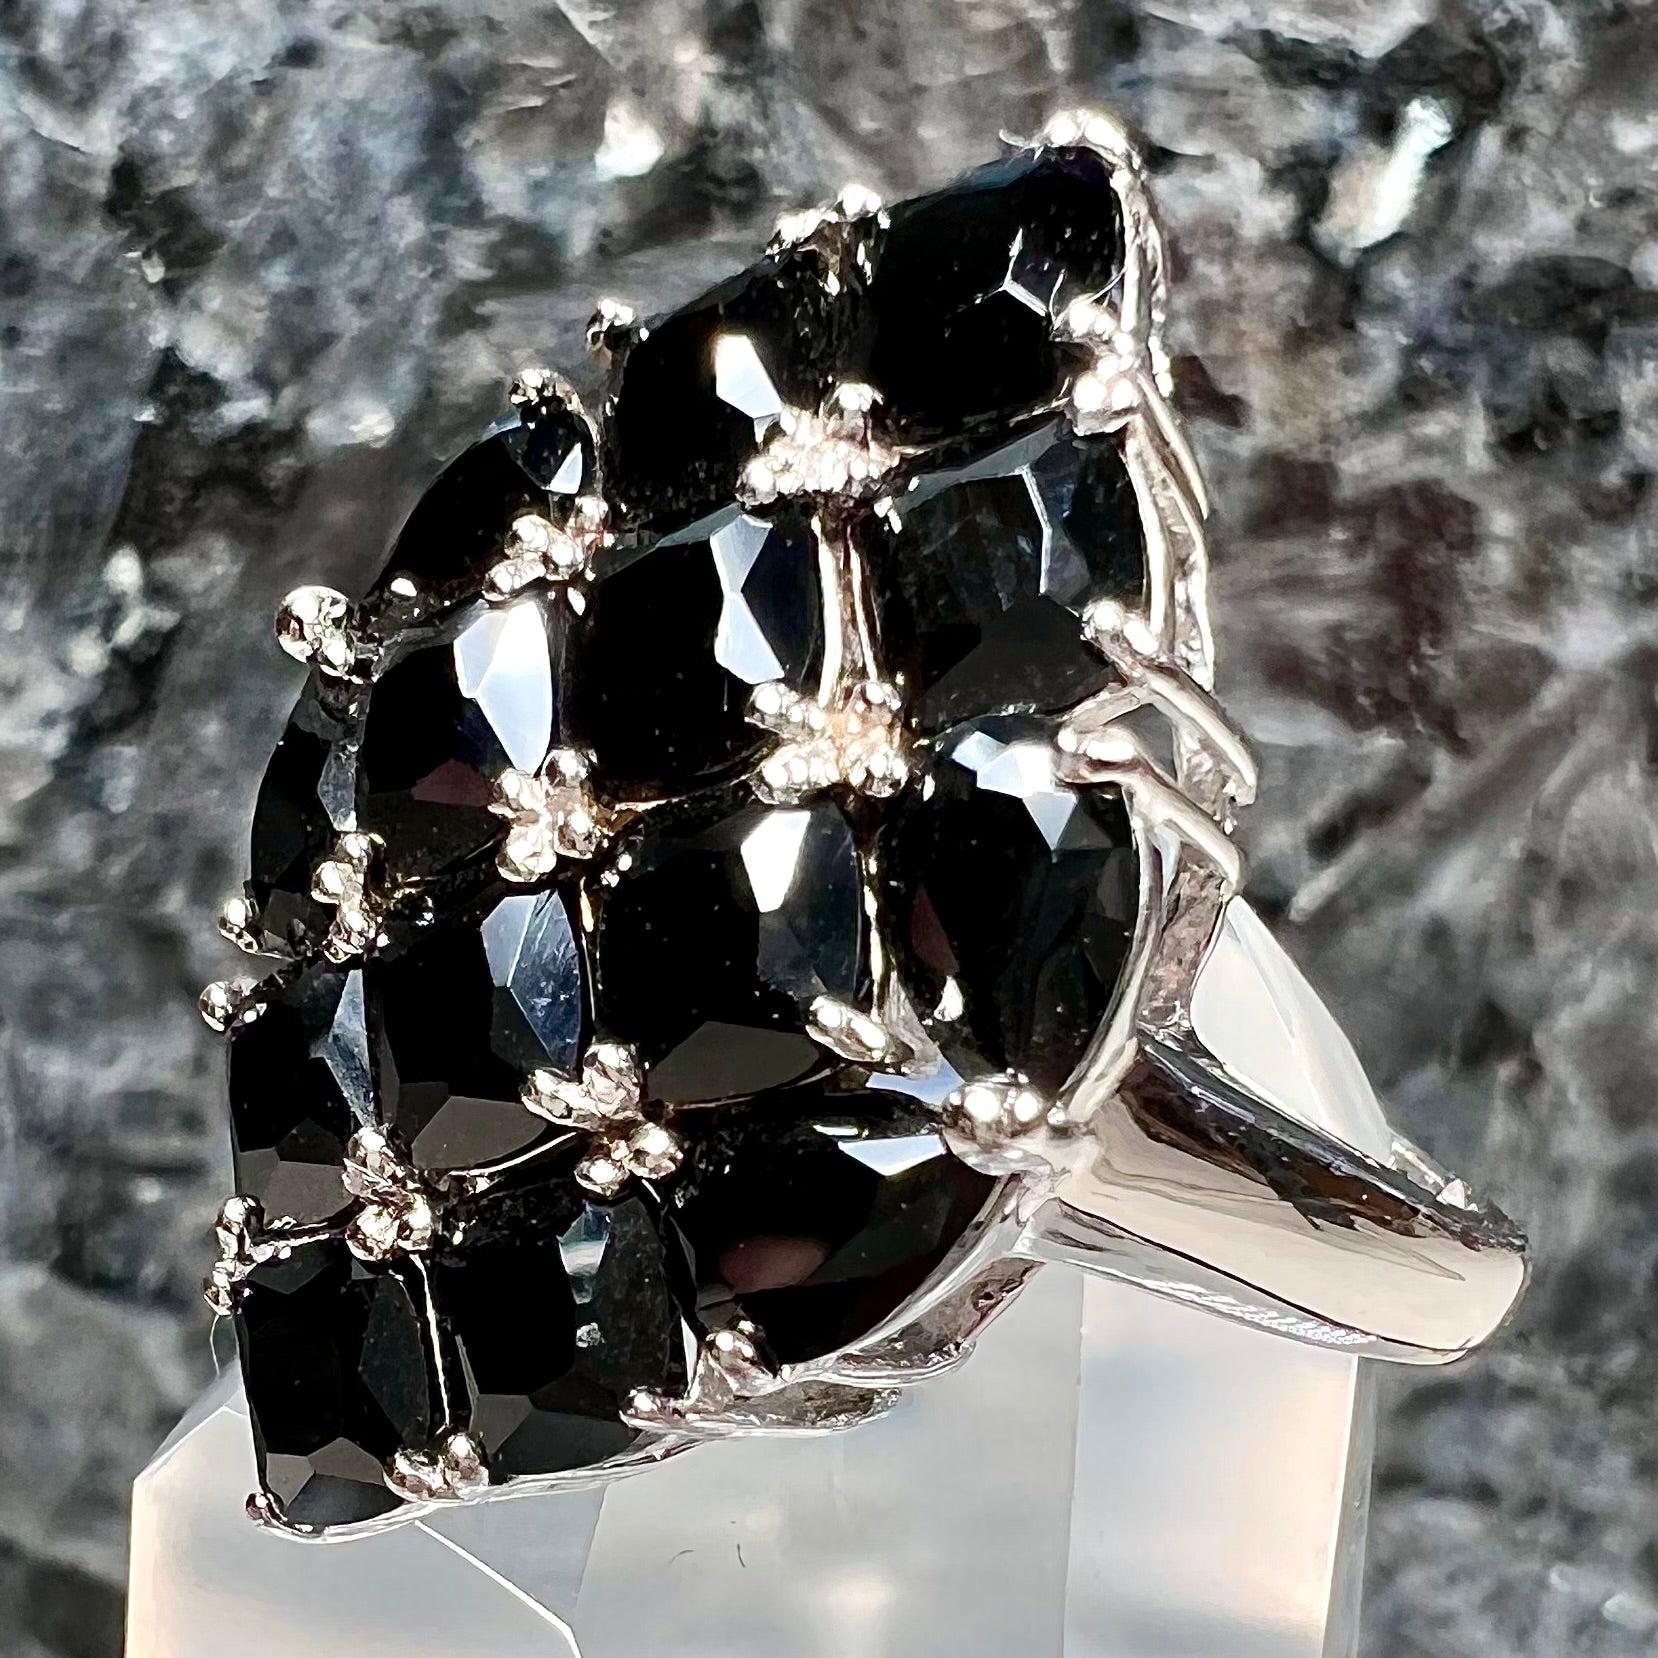 A sterling silver ring cluster set with faceted black spinel stones set to form a marquise shape.